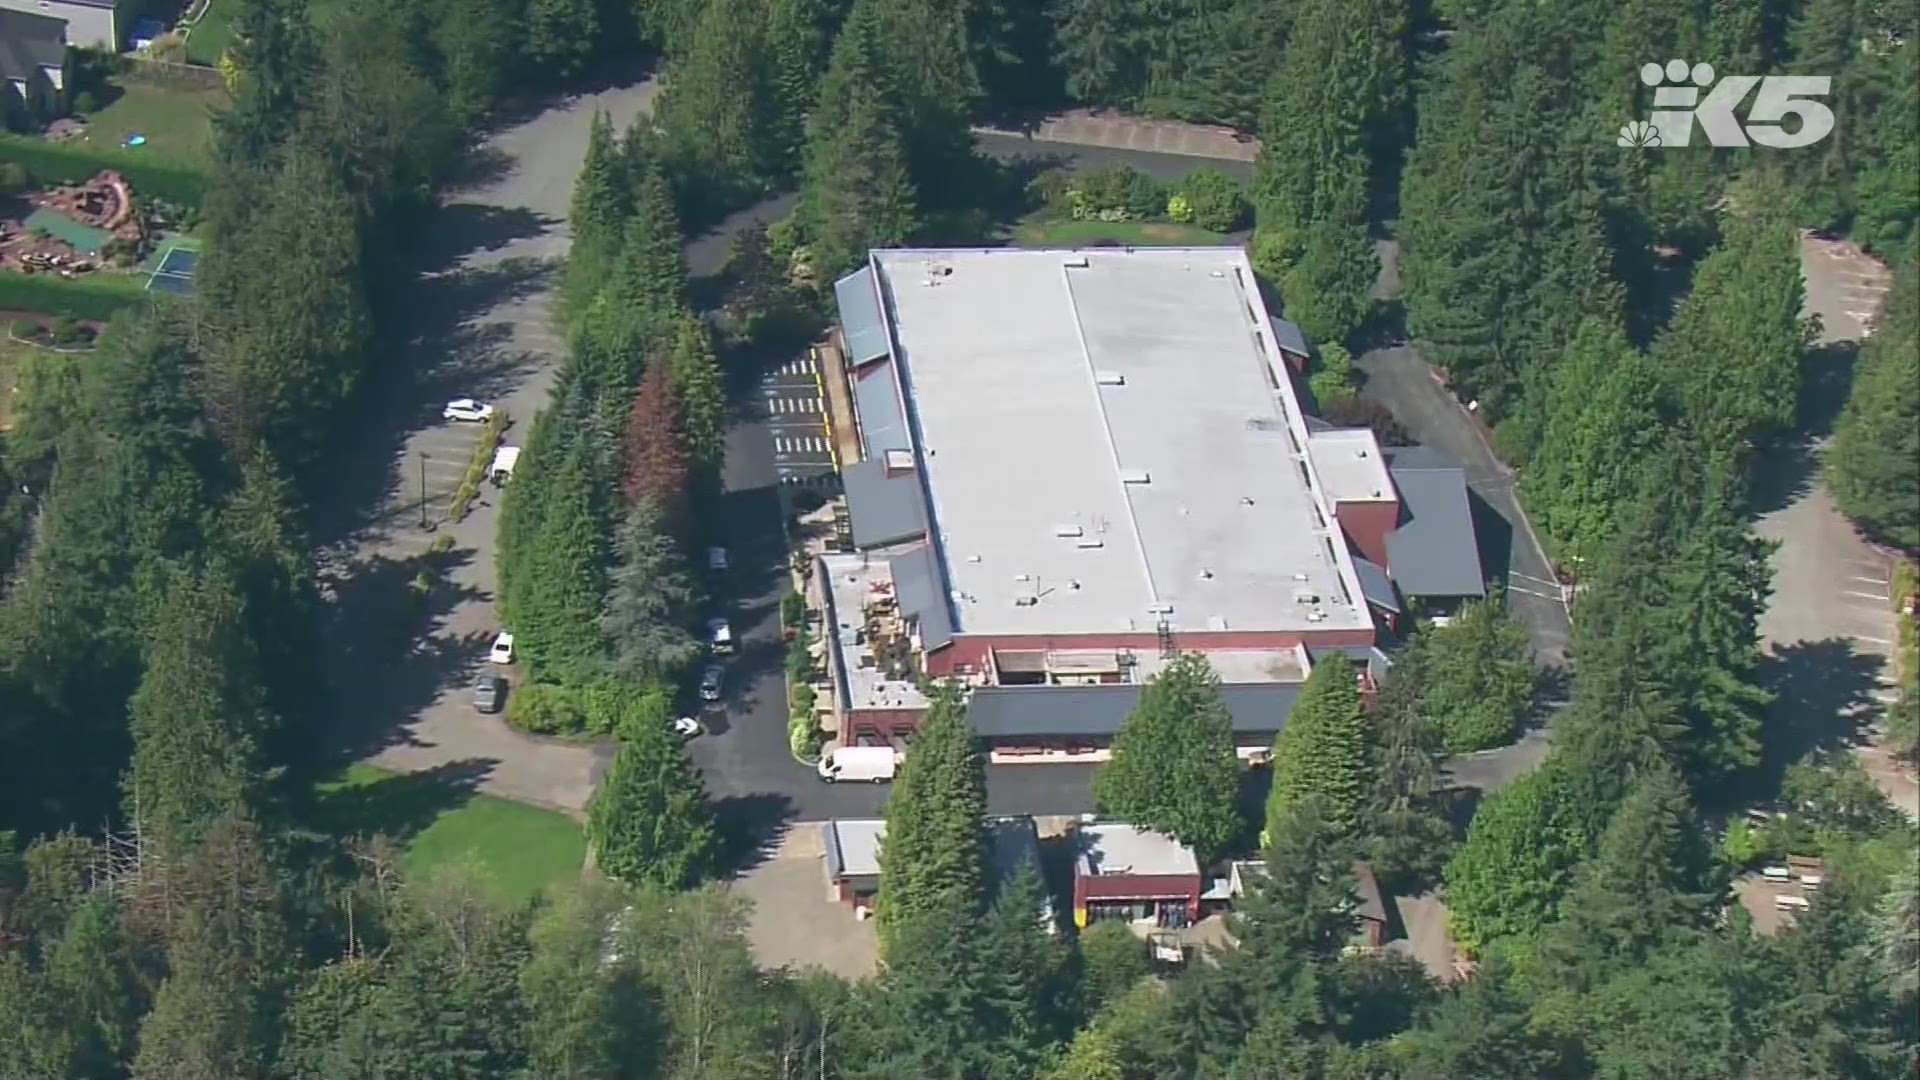 ATF was called in to investigate a fire at a Jehovah's Witness Hall in Puyallup.